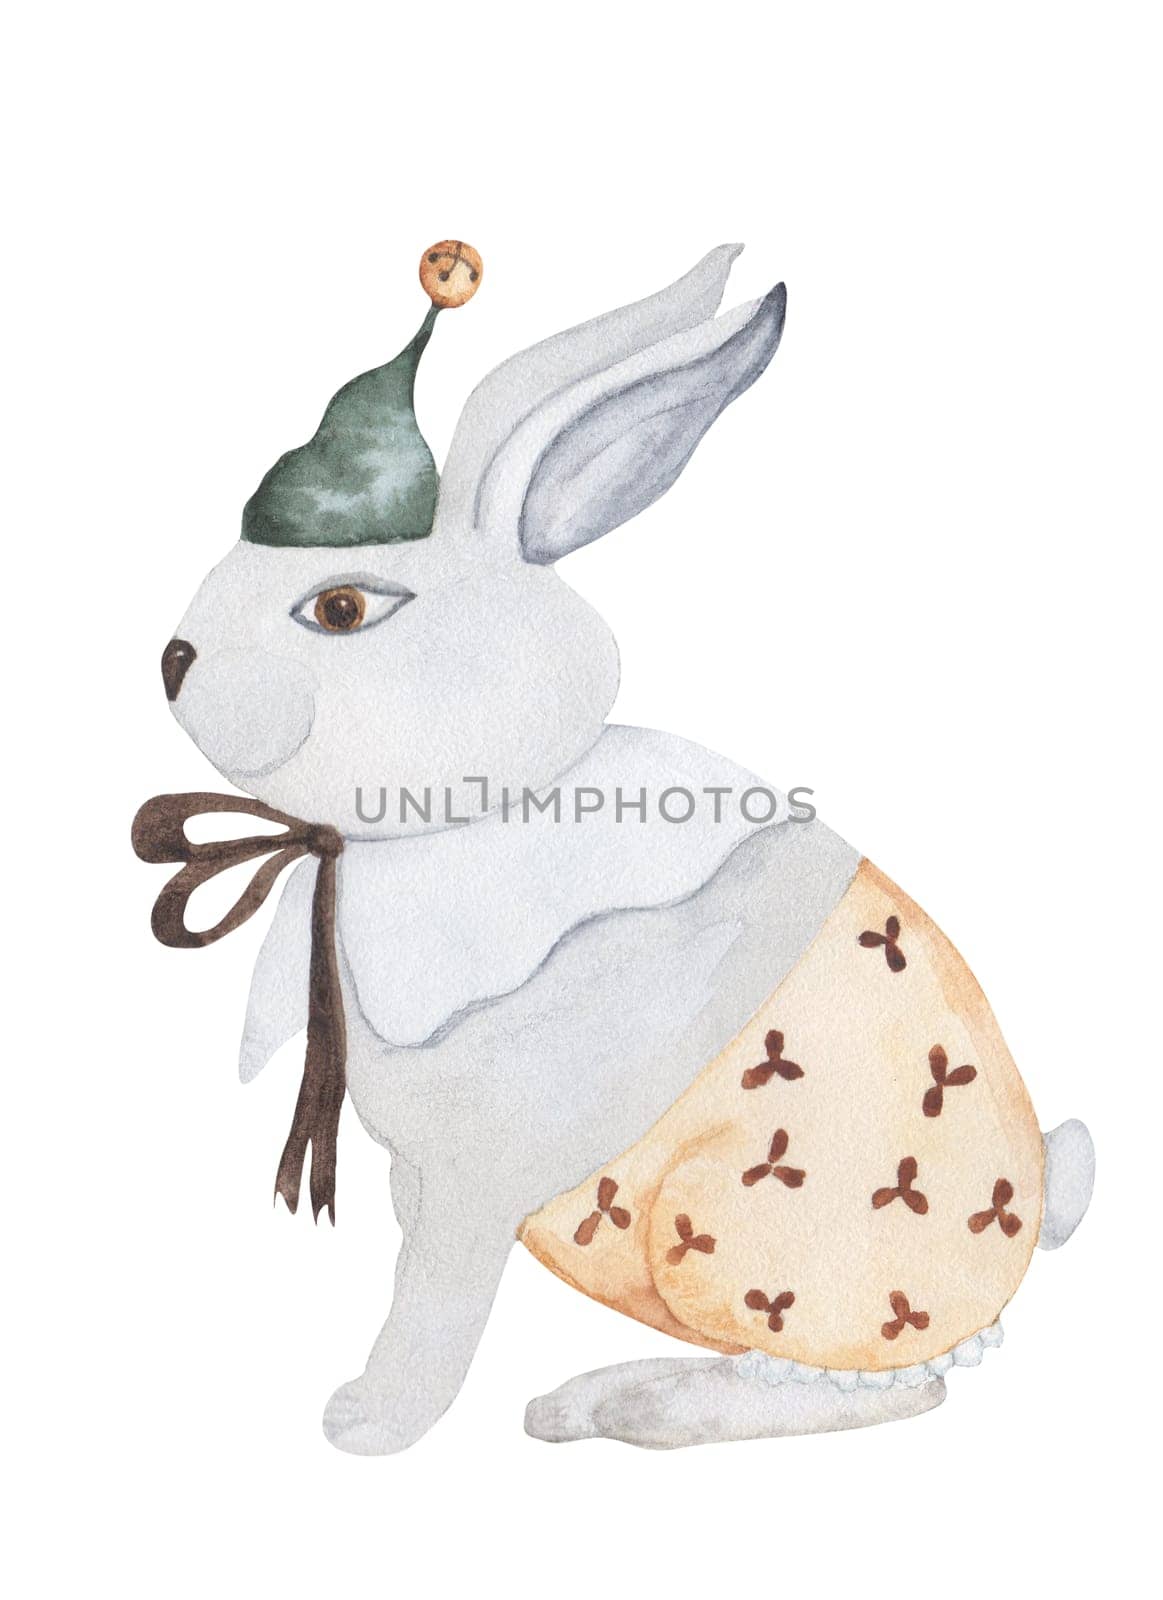 cute christmas vintage bunny. watercolor drawing without background. for your design banner cards invitation print on pillows t-shirts. High quality illustration